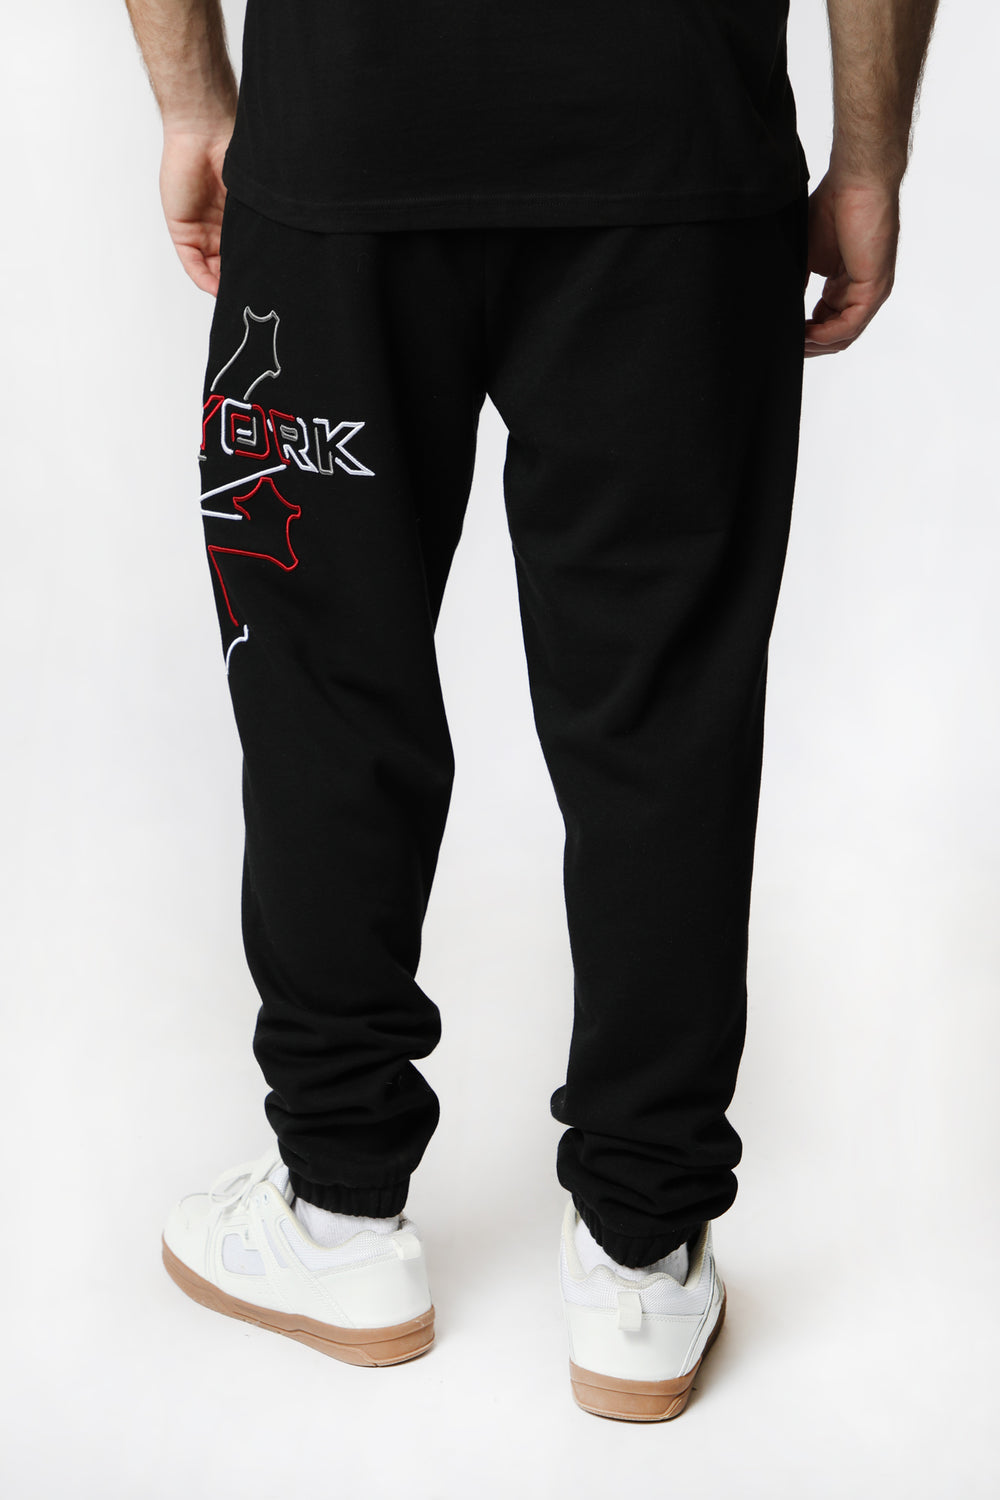 Zoo York Mens 3D Embroidered Sweatpant Zoo York Mens 3D Embroidered Sweatpant